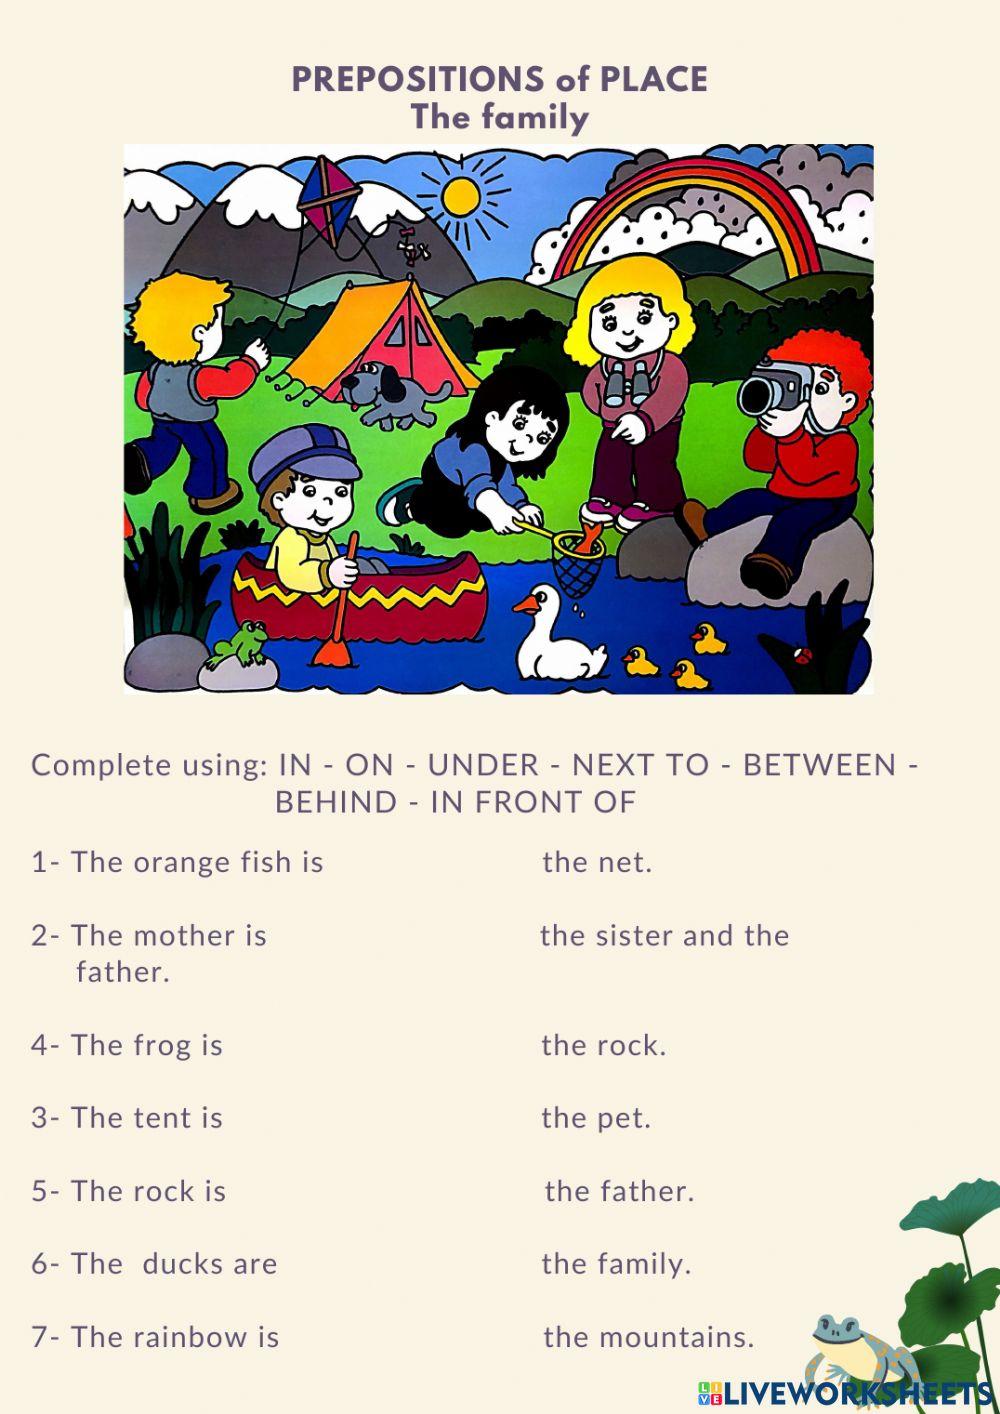 Prepositions of place & the family